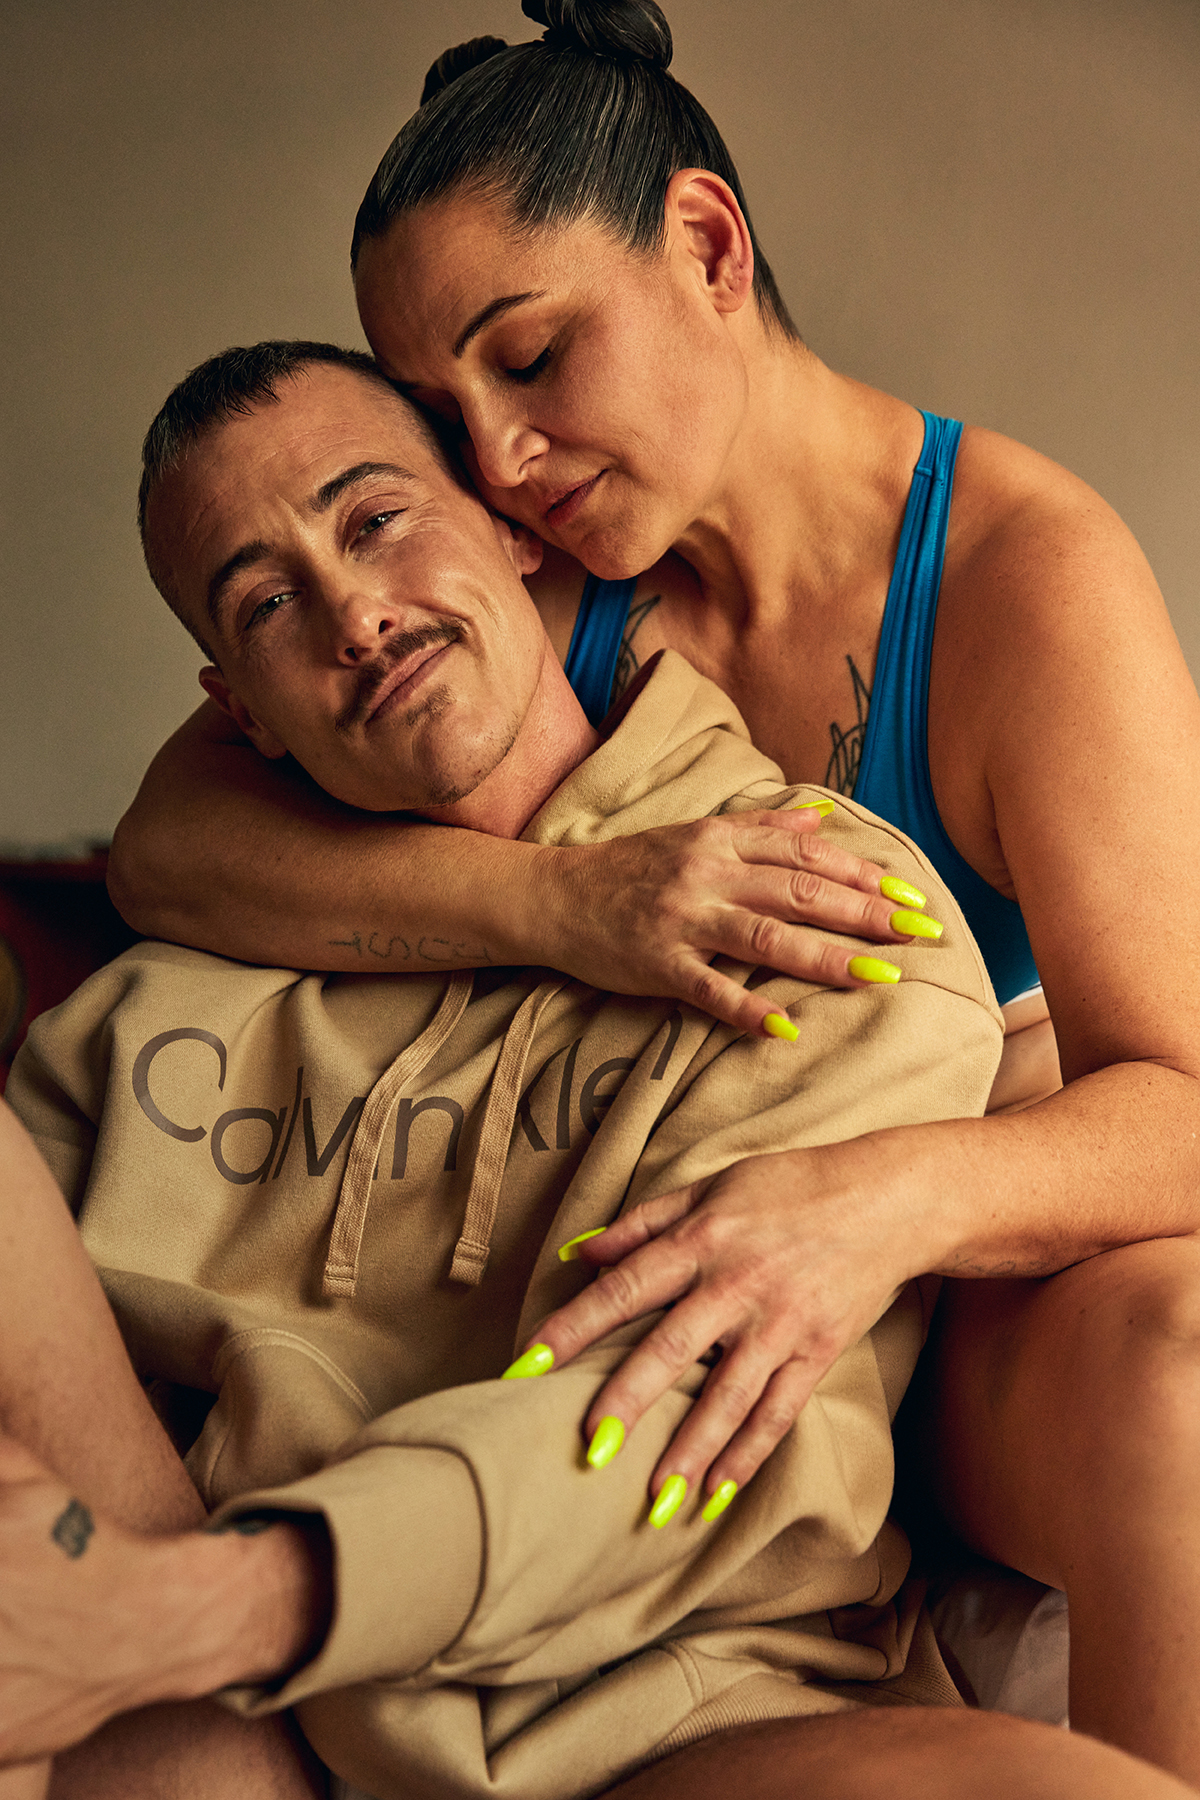 Calvin Klein's Reimagined Approach to Pride - V Magazine